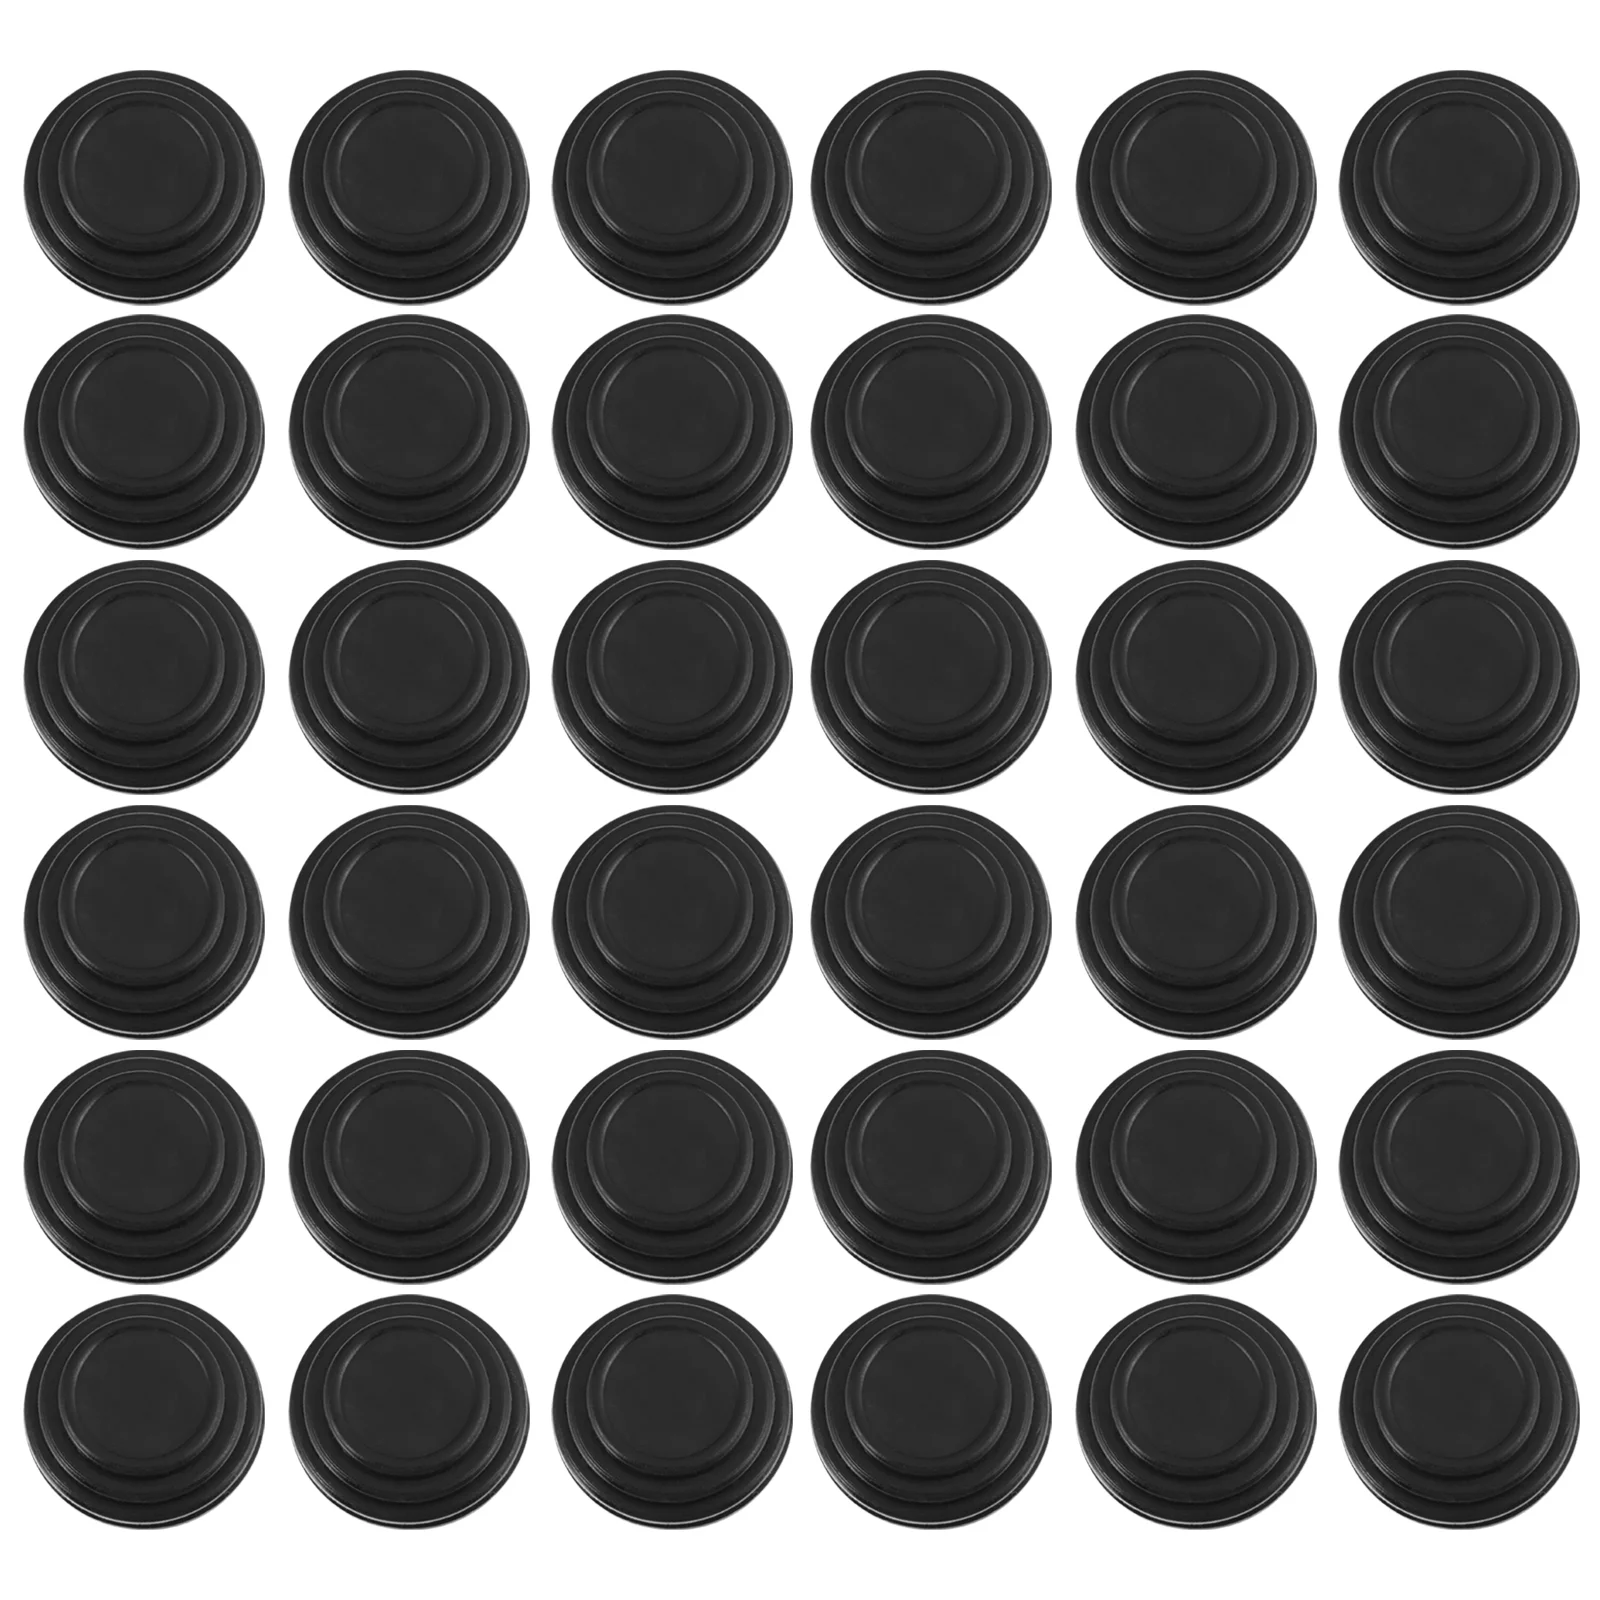 

24 Pcs Shock Absorbing Gasket Seal Stickers Anti-collision Silicone Pads Shock-proof Gaskets Protecting Car Silica Gel